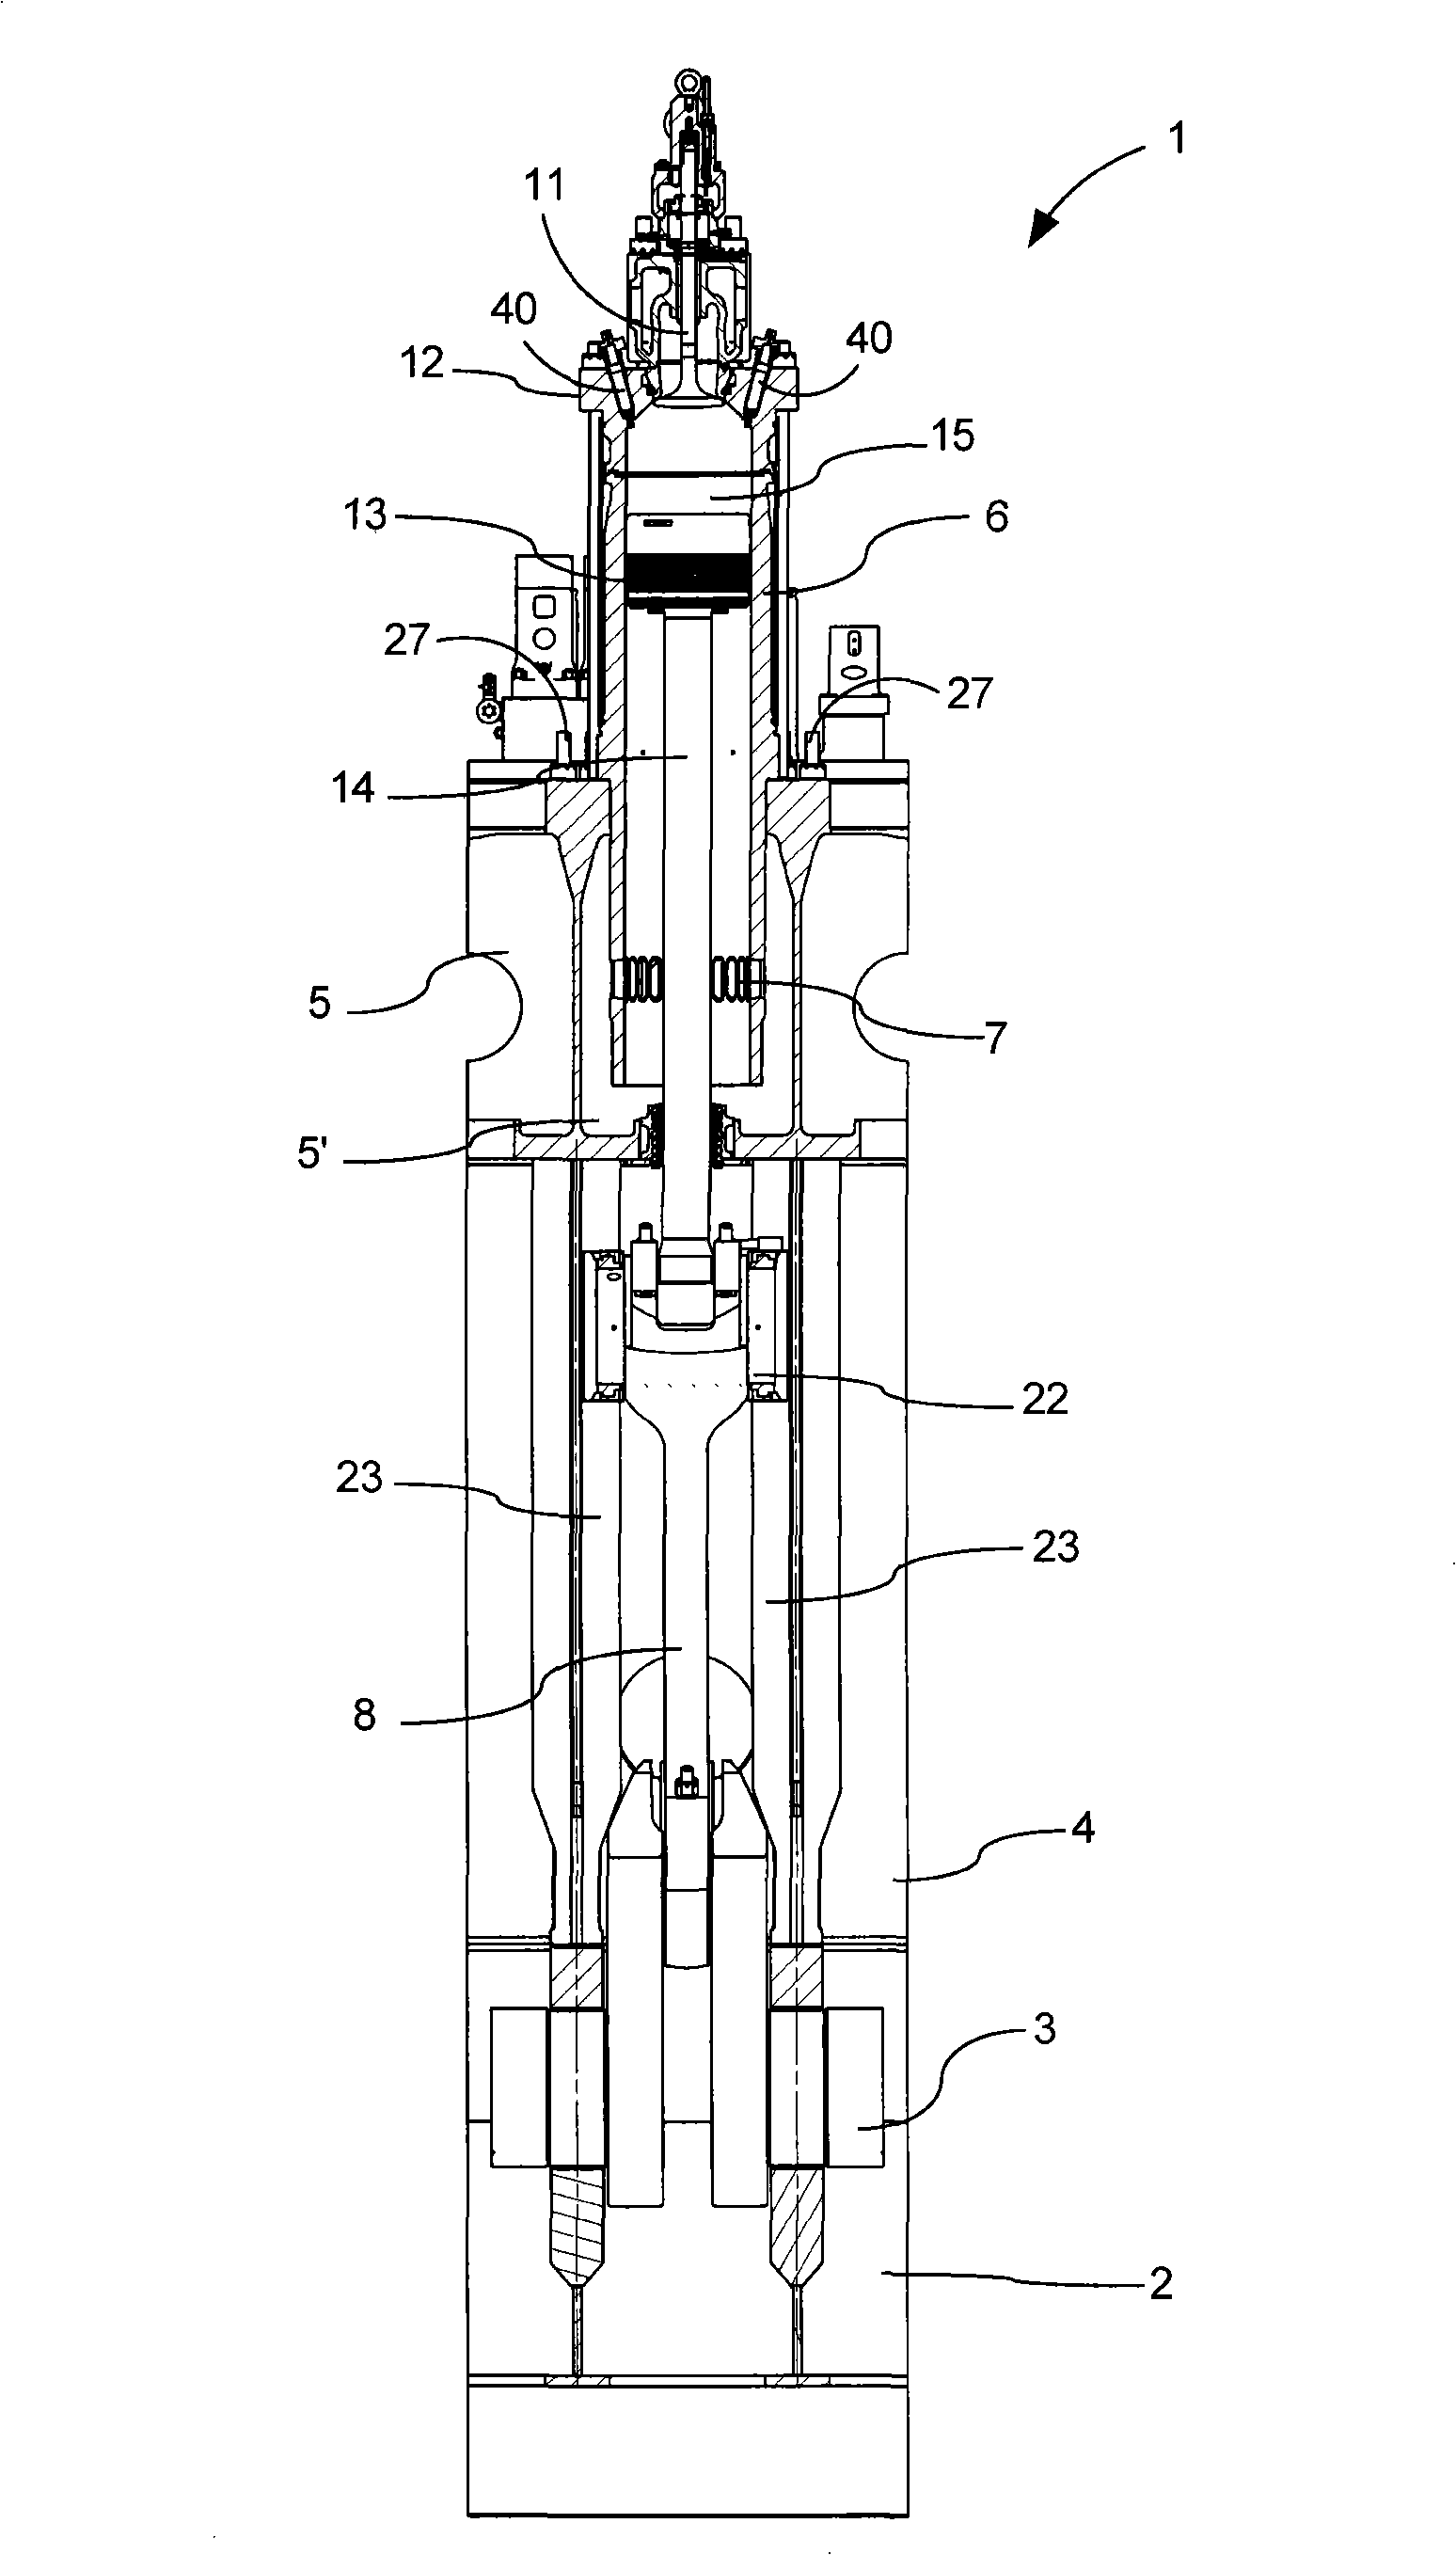 Cam driven exhaust valve actuating system for large two-stroke diesel engine